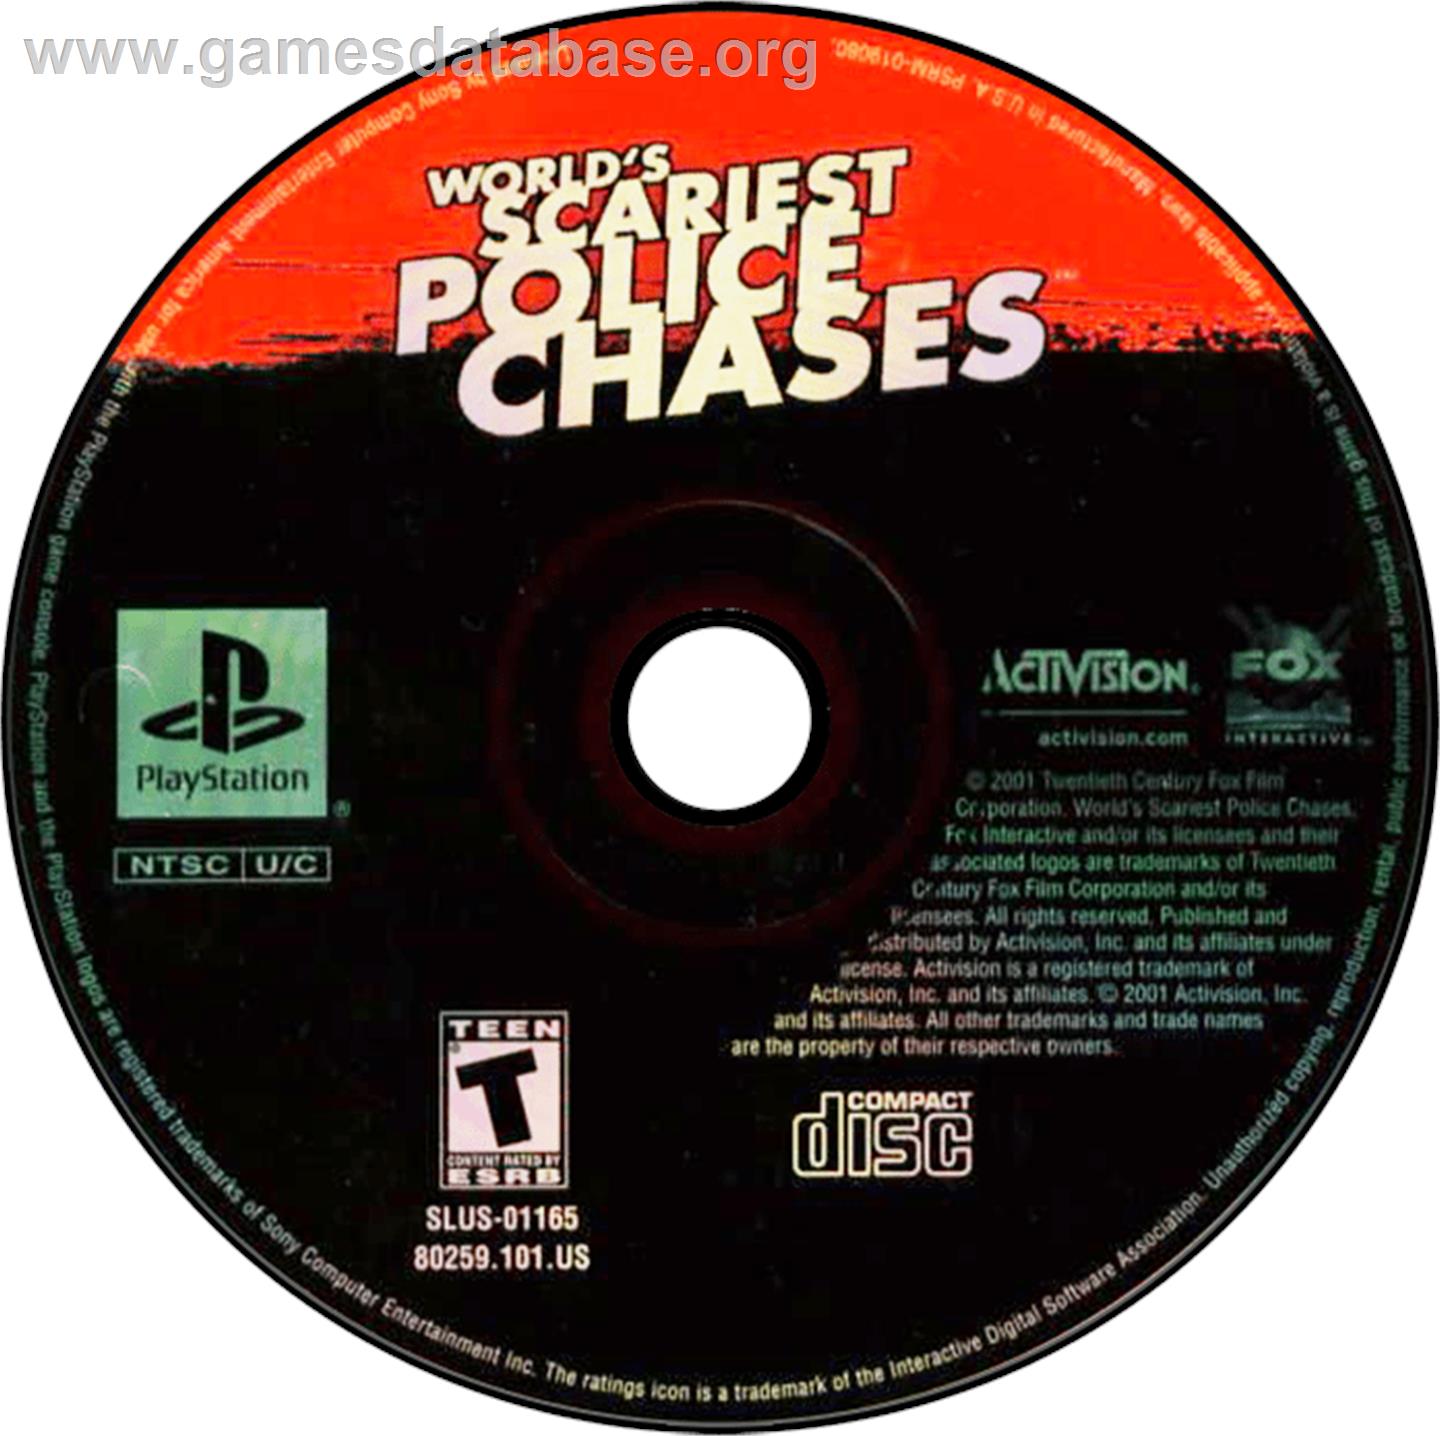 World's Scariest Police Chases - Sony Playstation - Artwork - Disc